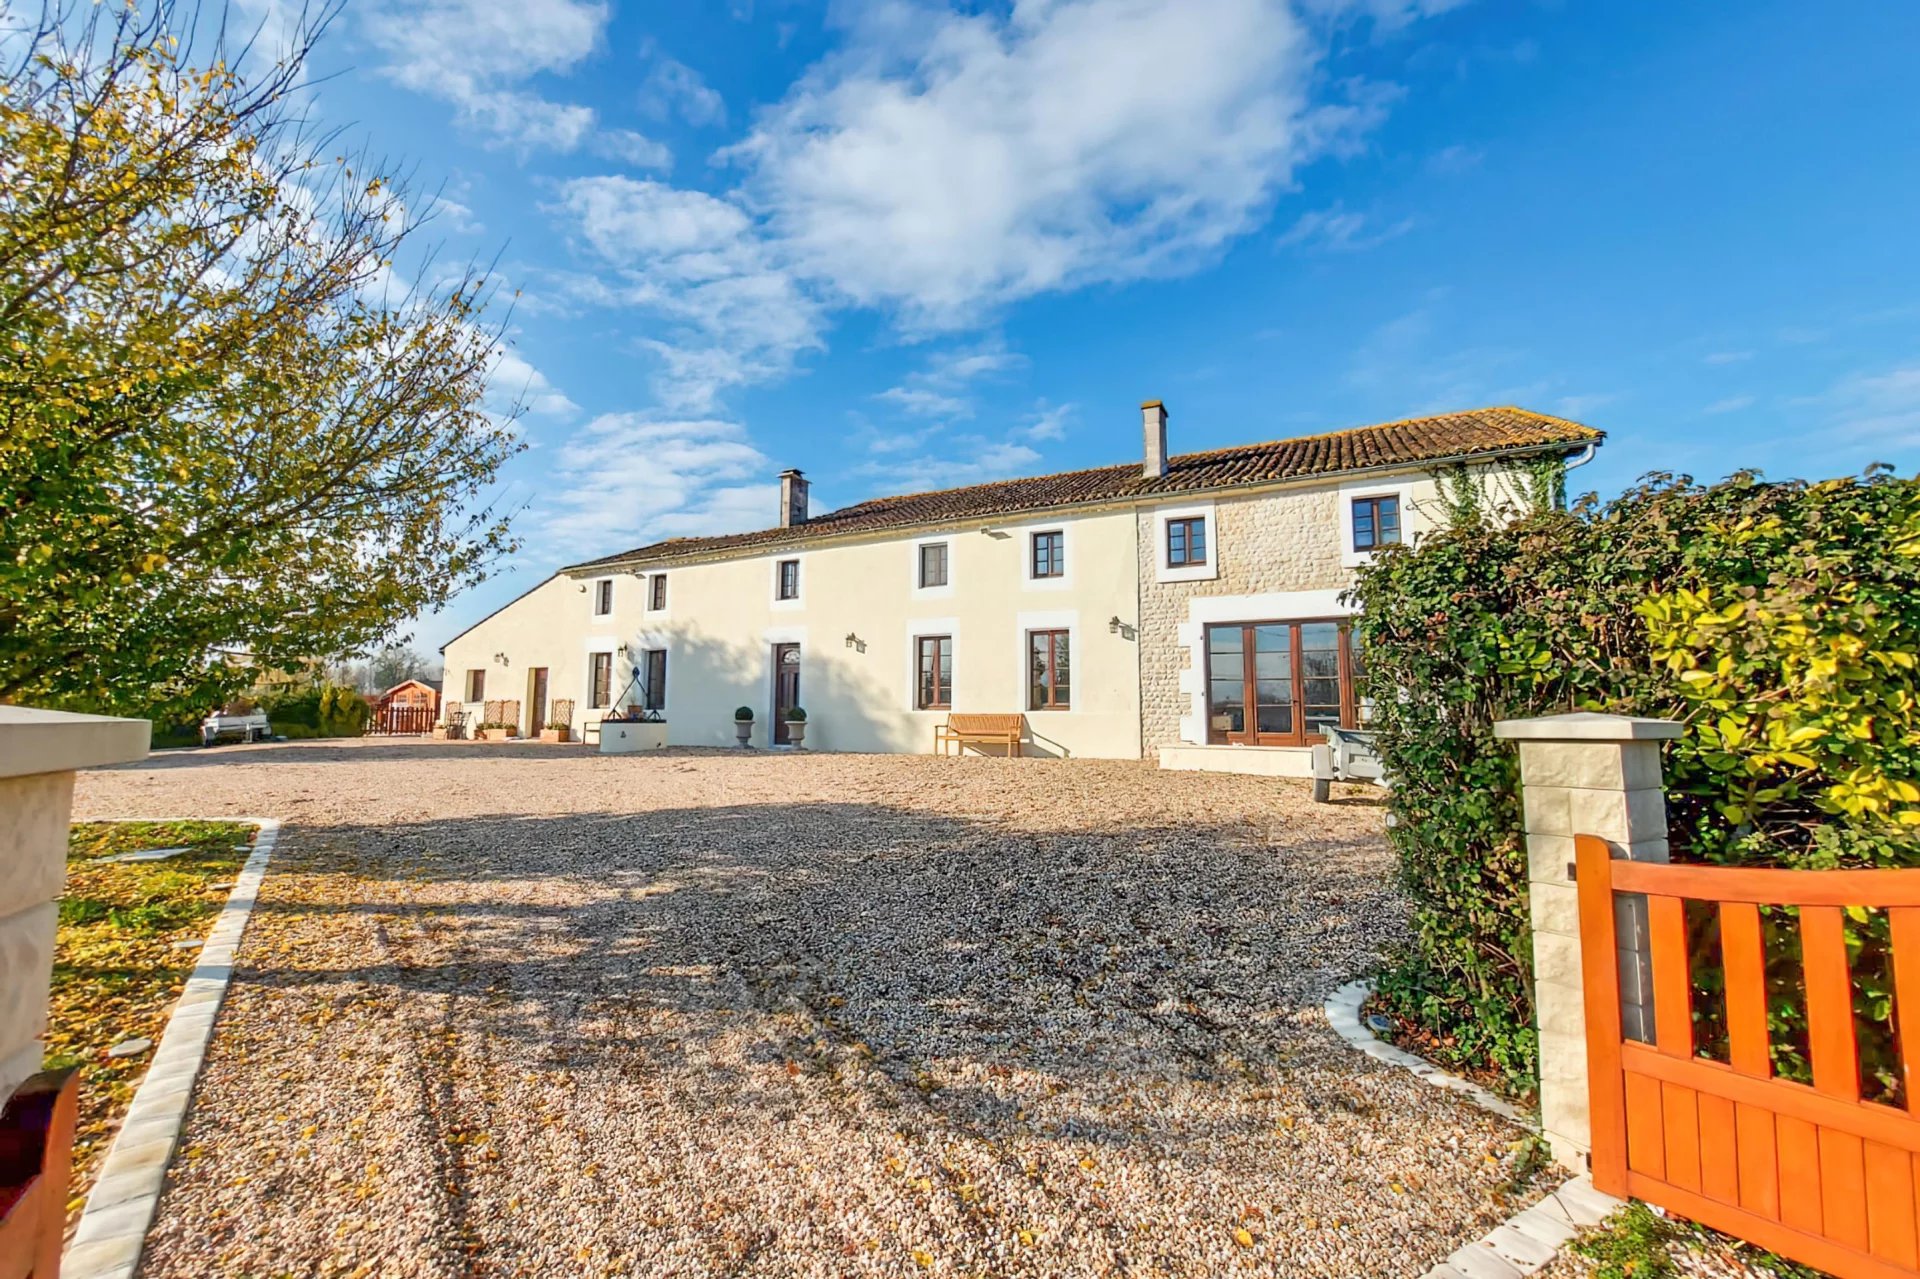 Substantial and beautifully presented 6-bedroom house close to Cognac